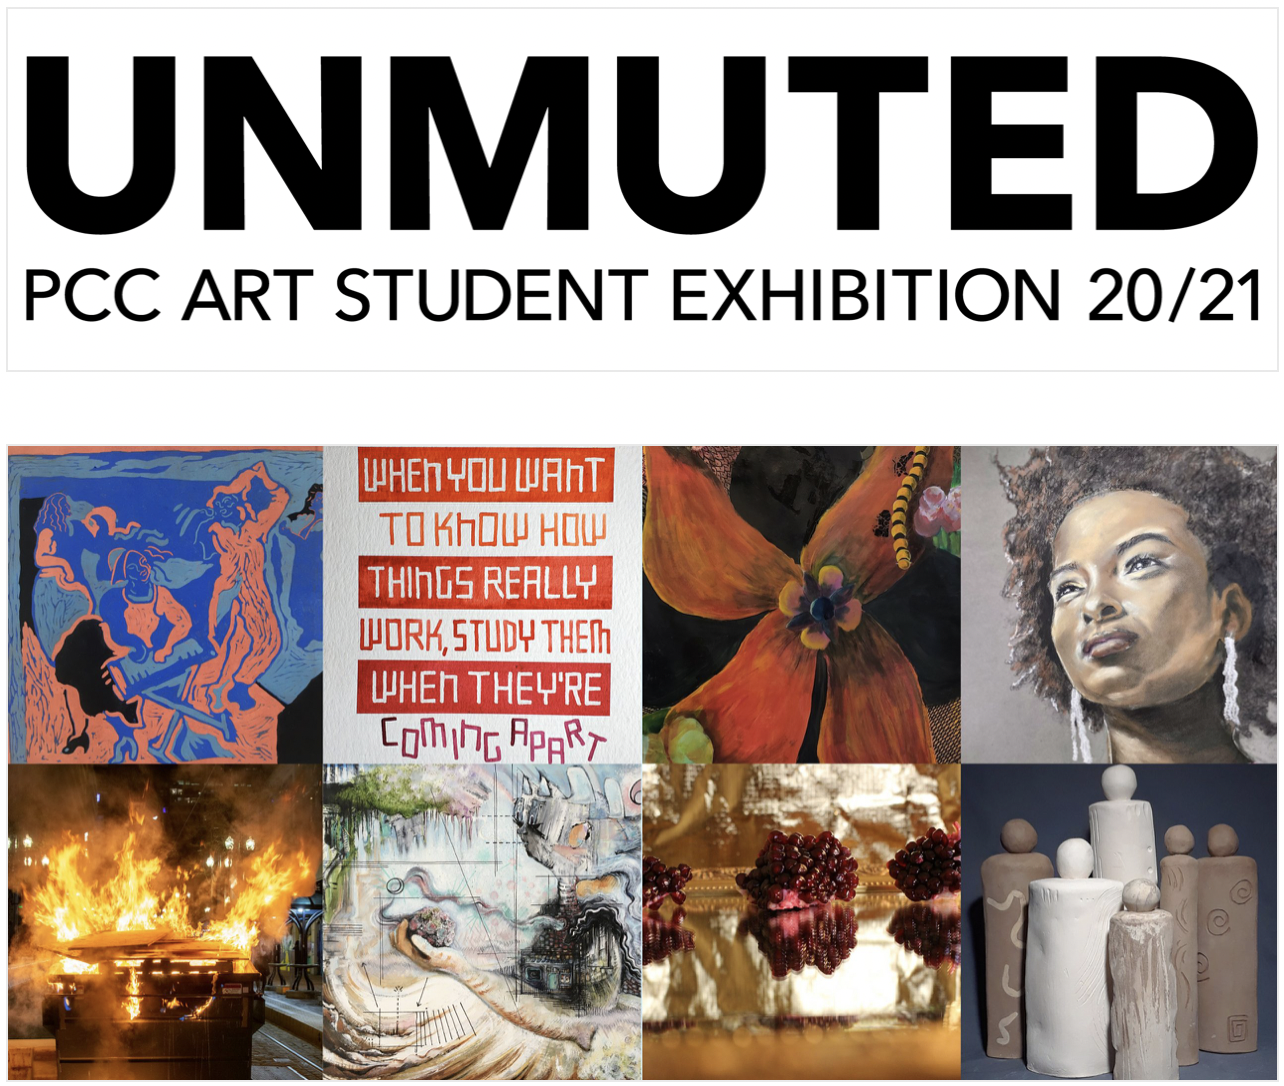 Exhibition title Unmuted with a collage of student art work.